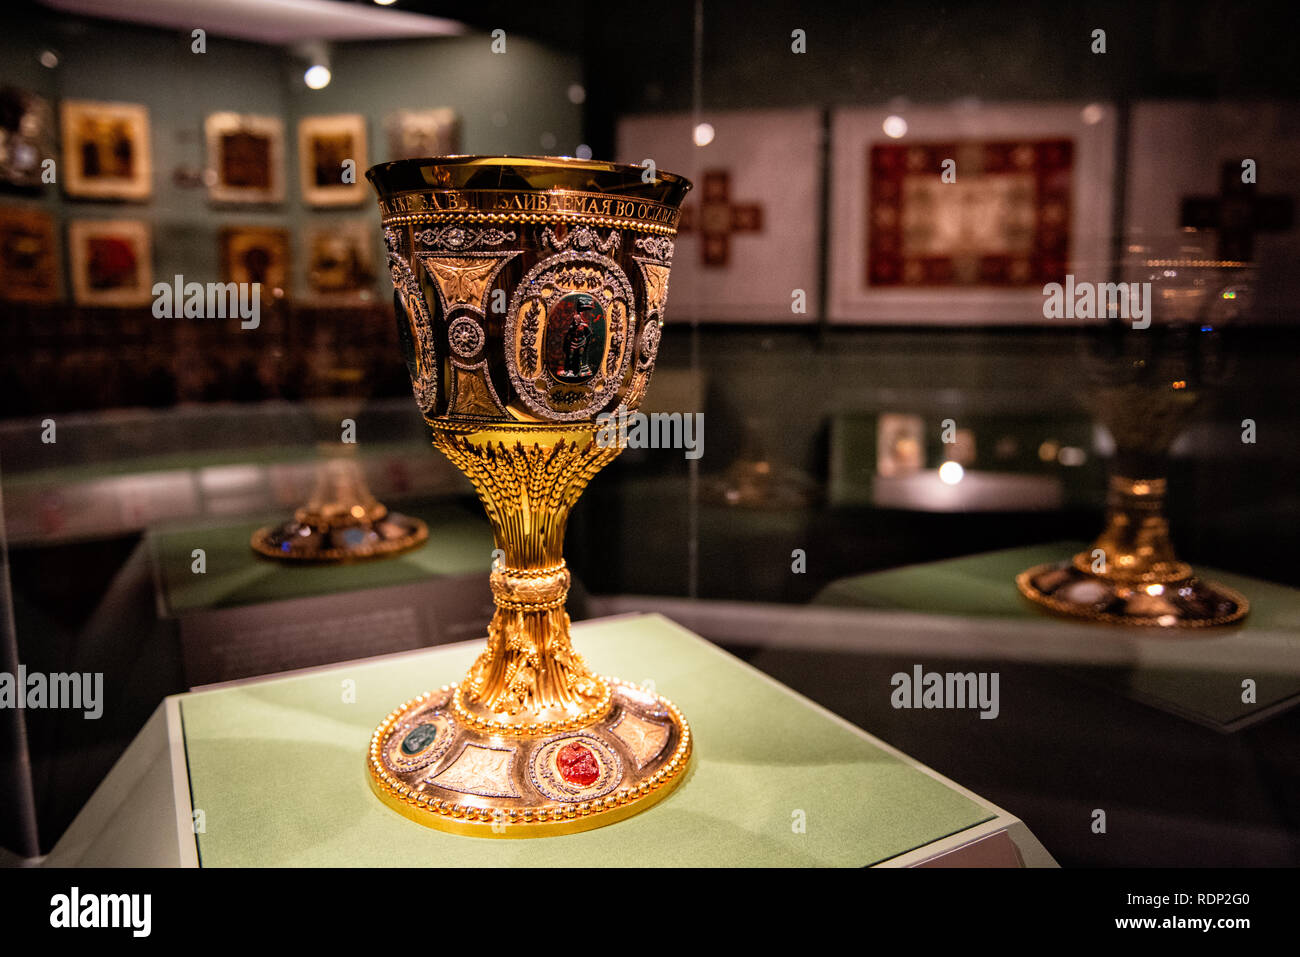 WASHINGTON DC, United States — A Russian chalice (1791) decorated with gold, diamonds, chalcedony, bloodstone, nephrite, carnelian, and cast glass. It was presented by Catherine the Great to the Alexander Nevsky Monastery in St. Petersburg and is one of the most significant items in Post's collection of chalices. Hillwood Estate and Museum in Washington DC is the former residence of businesswoman, socialite, philanthropist, and collector Marjorie Merriweather Post, Hillwood is known for housing and displaying Post's large collection of decorative arts, with particular strengths in collections  Stock Photo